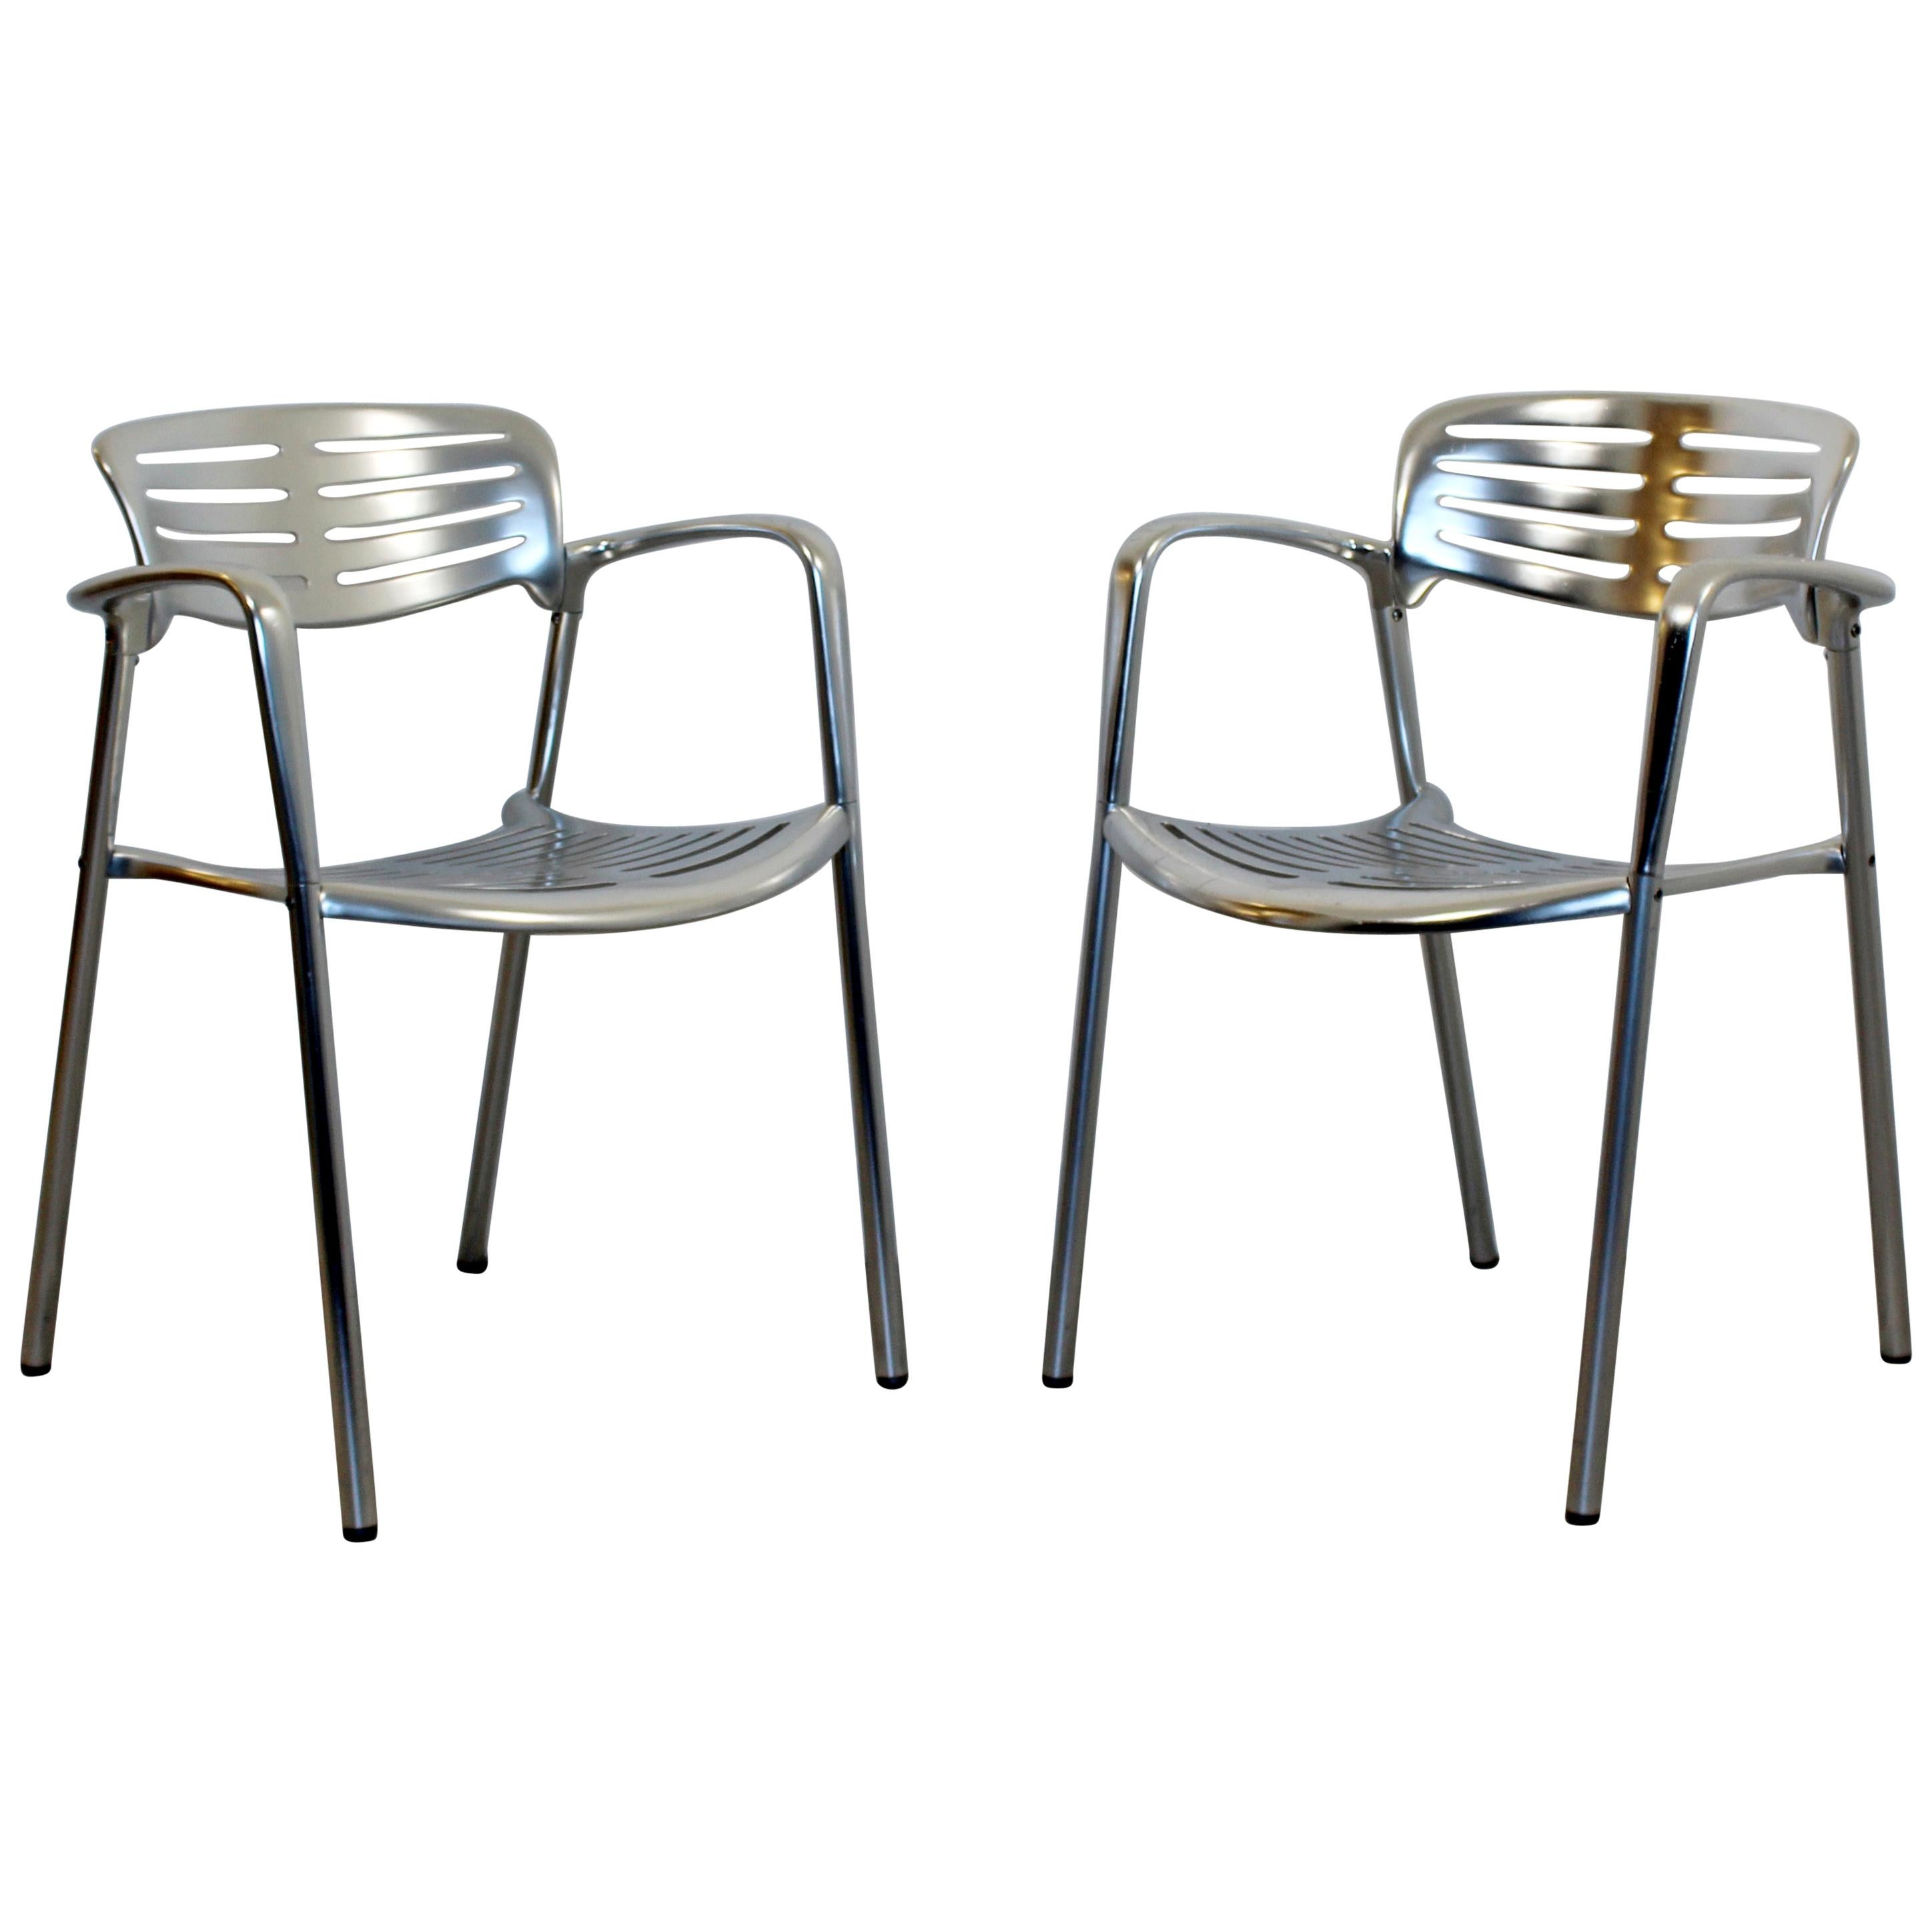 Contemporary Modernist Aluminum Pair of Chairs Toledo by Jorge Pensi Spain 1980s